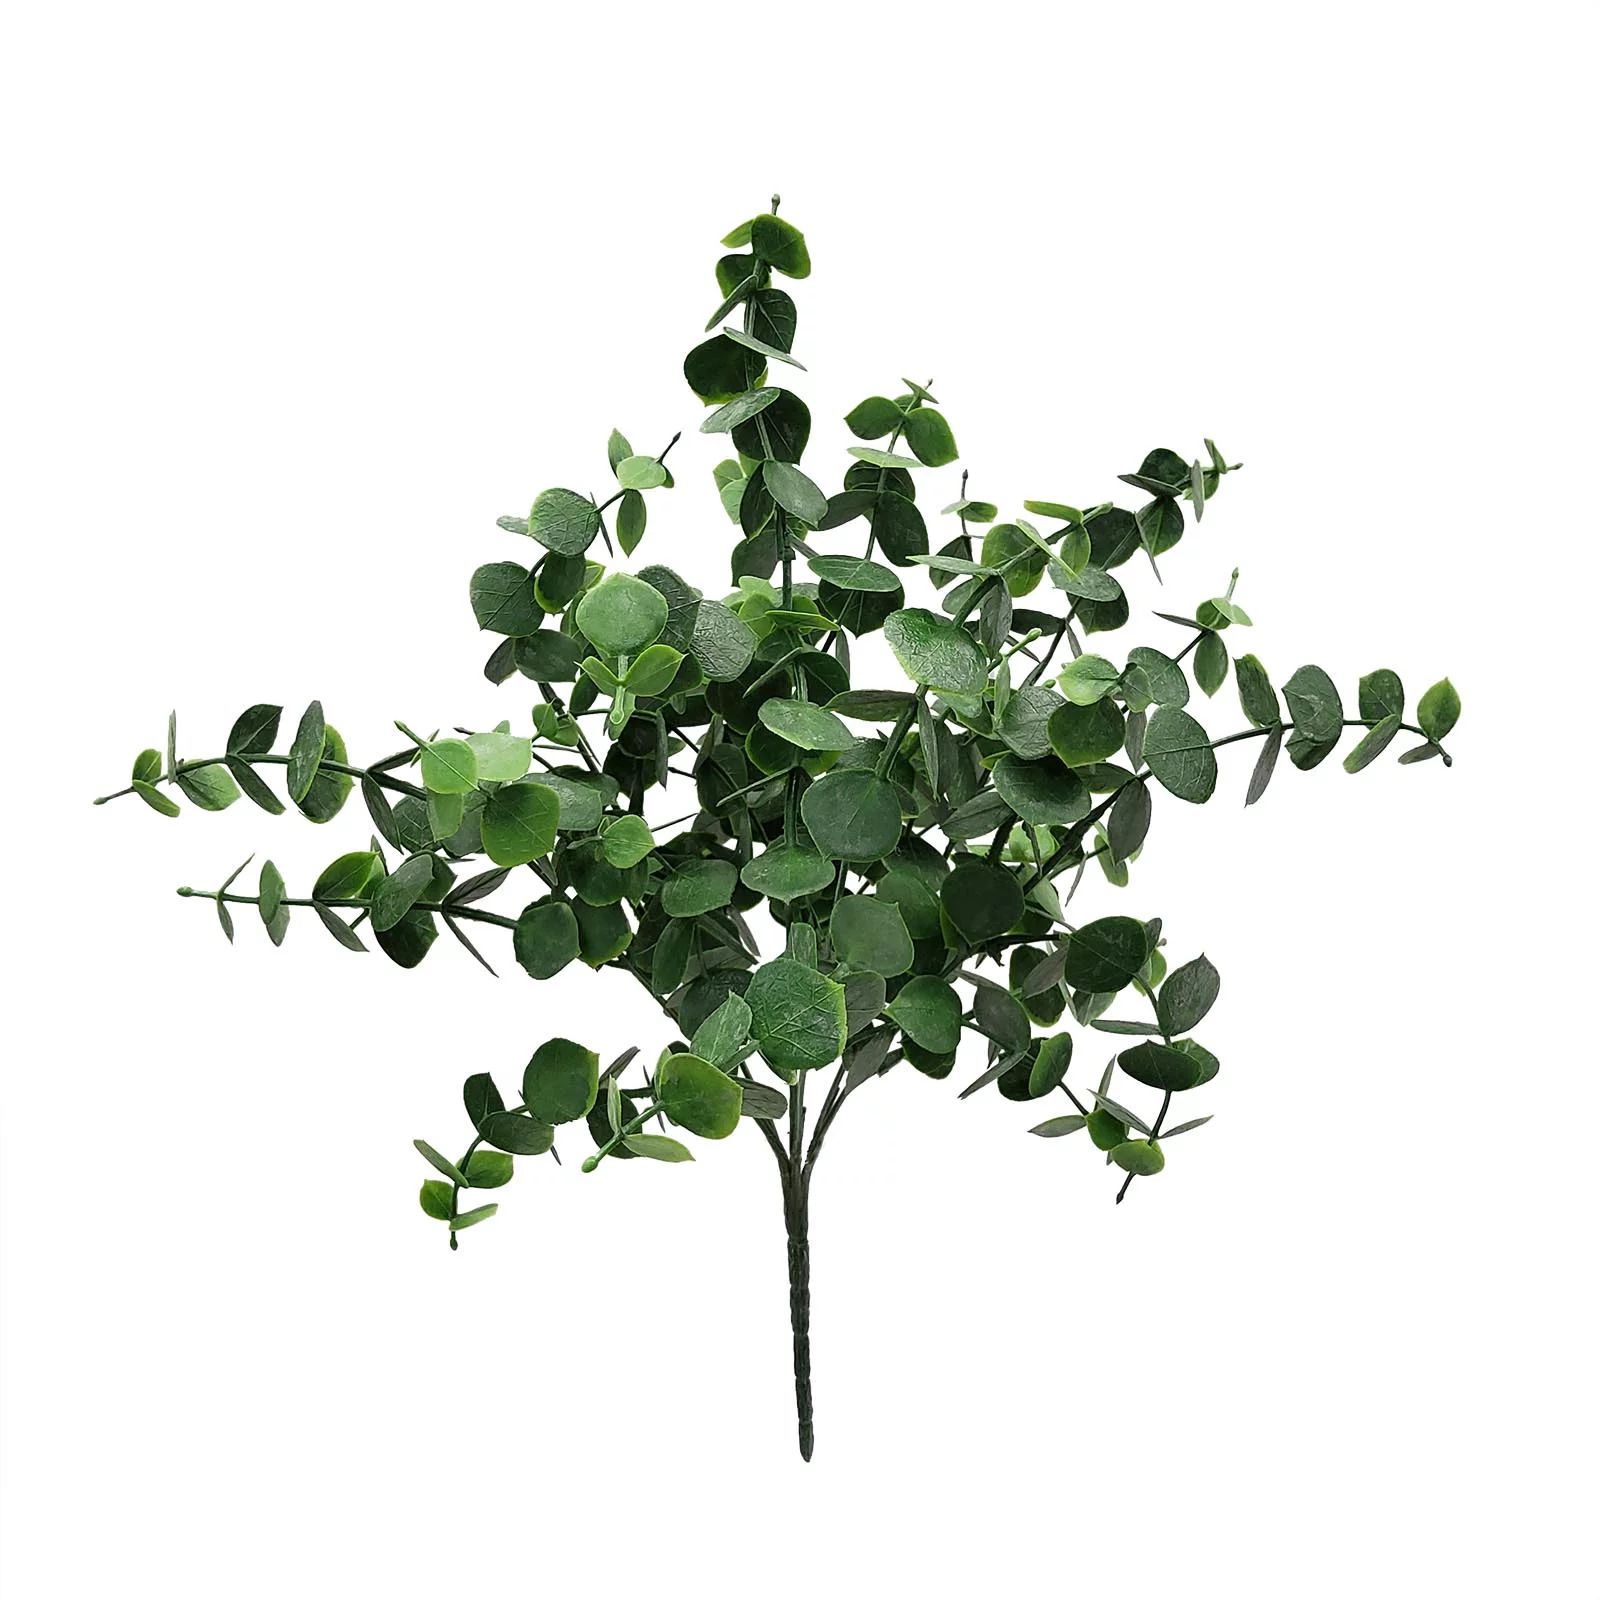 Mainstays 14" Artificial Plant, Eucalyptus Leaves Pick, Green Color. Indoor Use | Walmart (US)